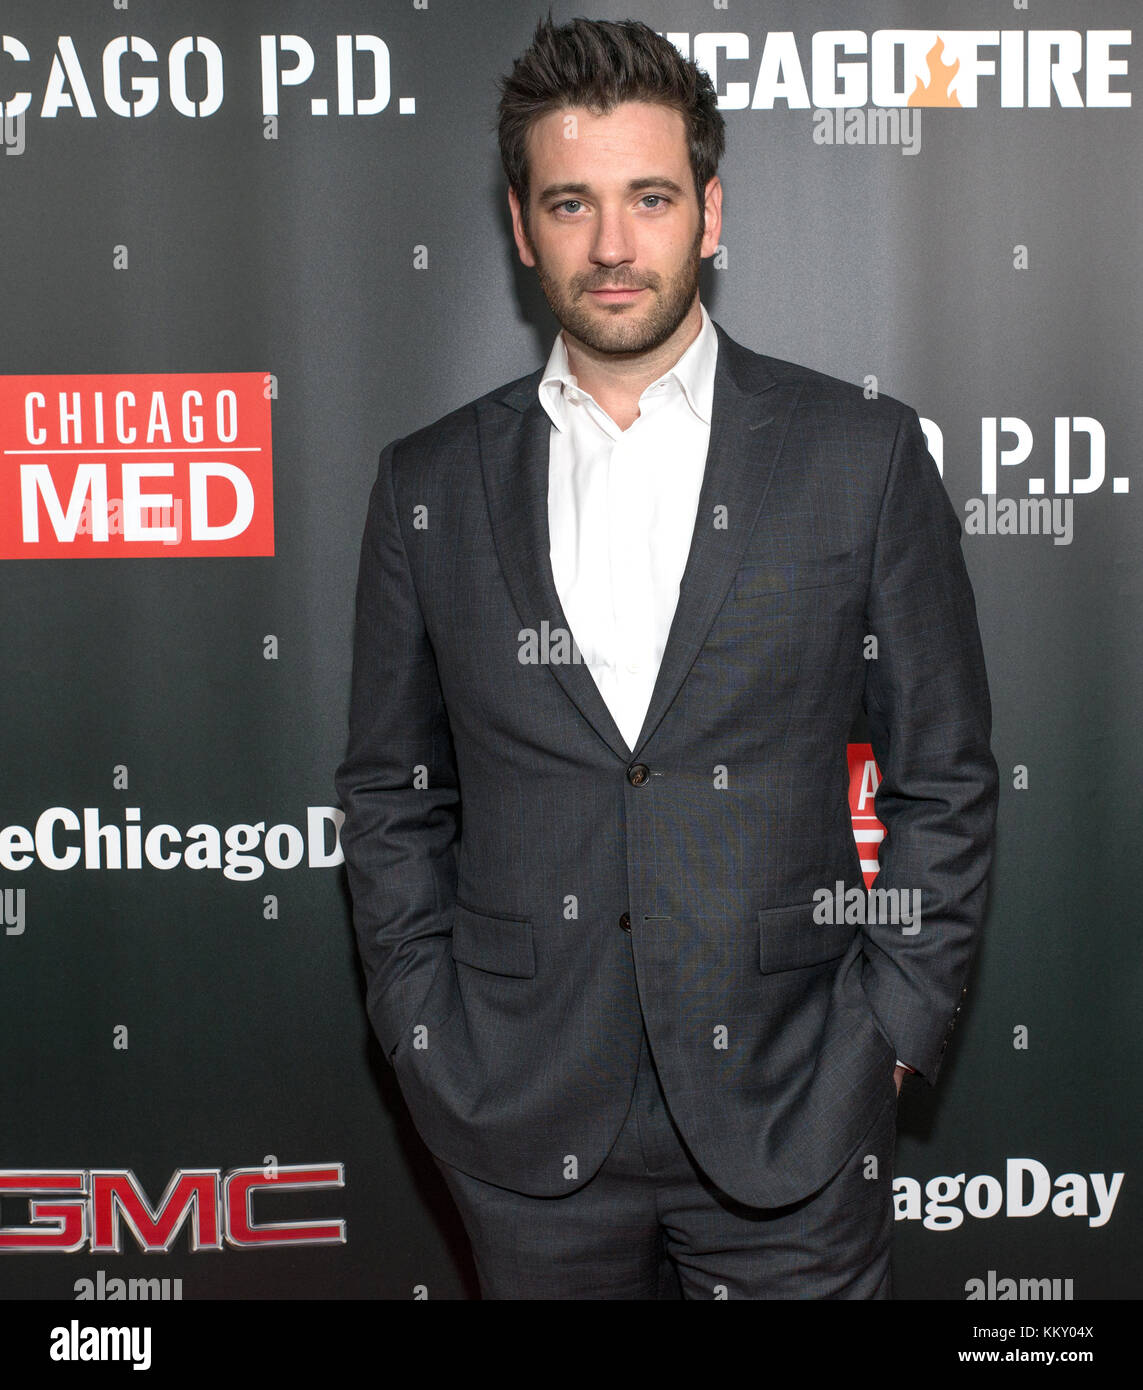 3rd annual NBC One Chicago Party featuring cast members from Chicago Fire, Chicago Med and Chicago P.D - Arrivals  Featuring: Colin Donnell Where: Chicago, Illinois, United States When: 30 Oct 2017 Credit: WENN Stock Photo